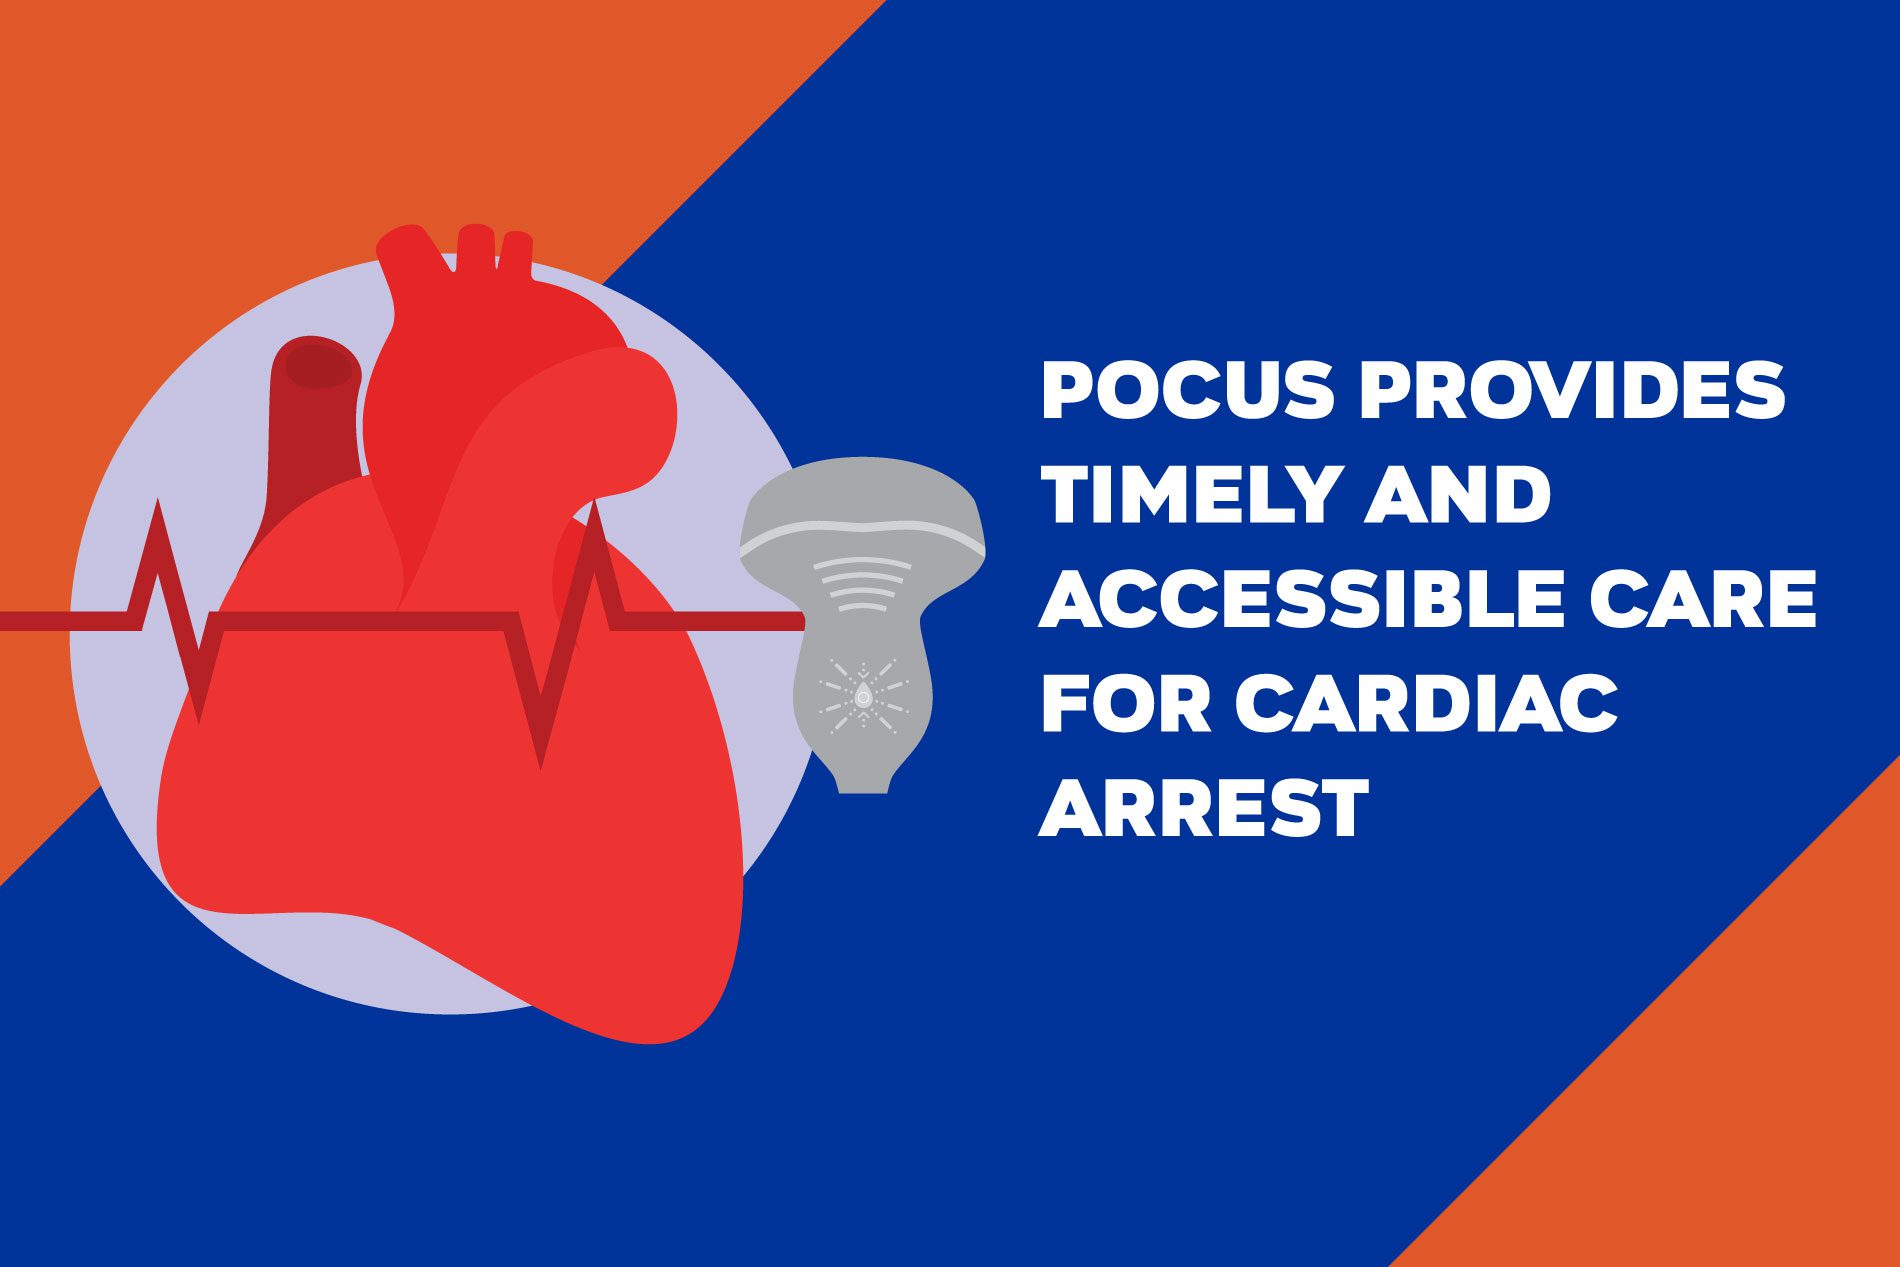 POCUS Provides Timely and Accessible Care for Cardiac Arrest